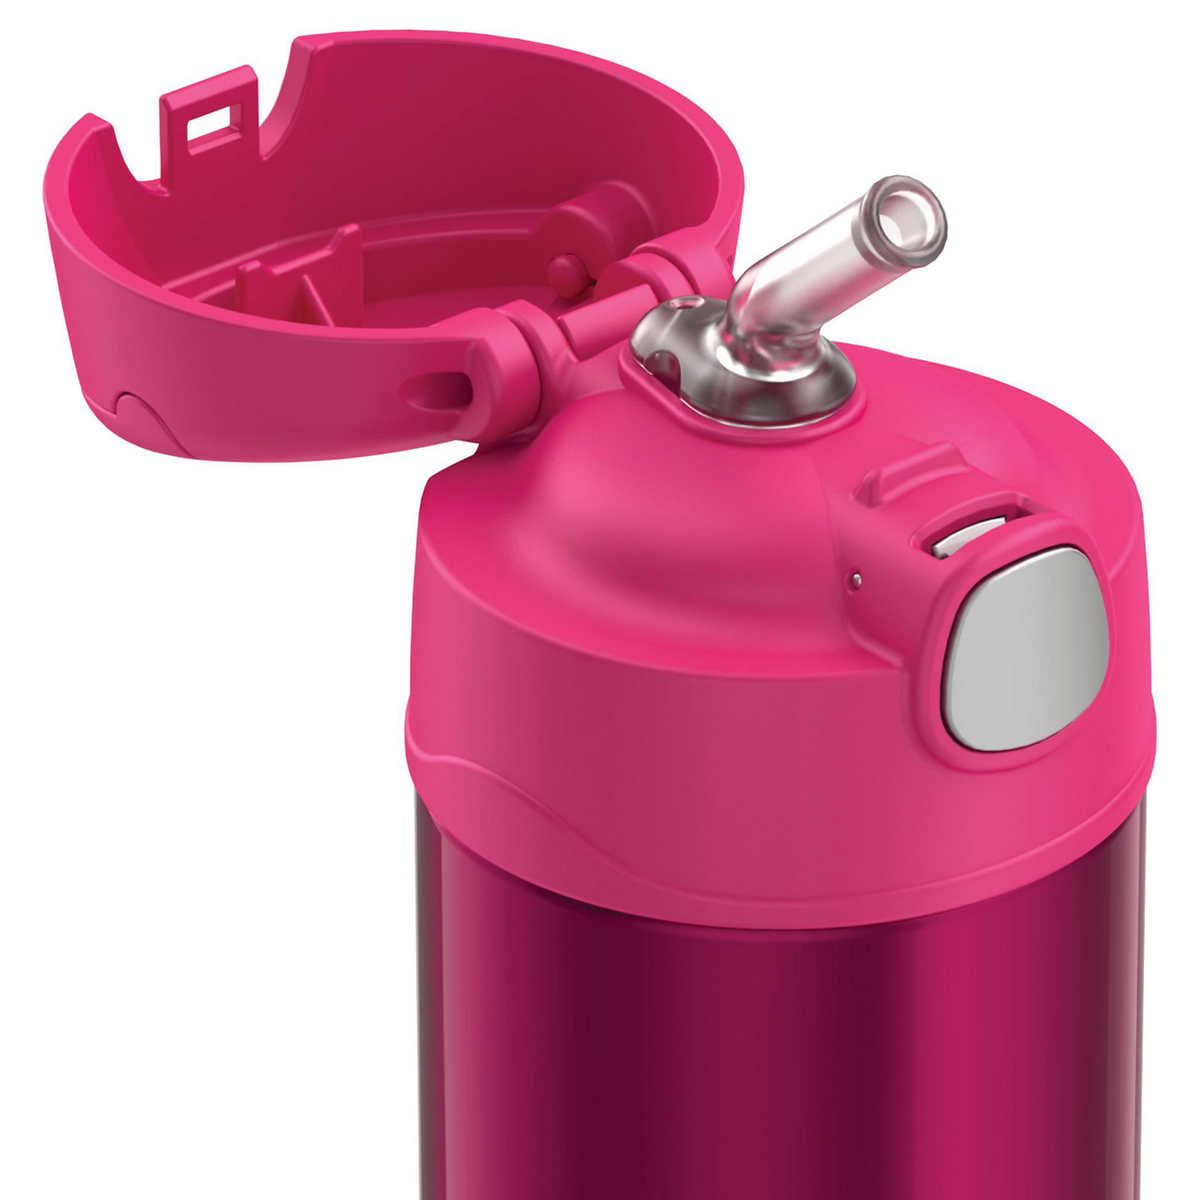 Thermos Funtainer Stainless Steel Food Jar - Pink, Count of: 1 - Harris  Teeter